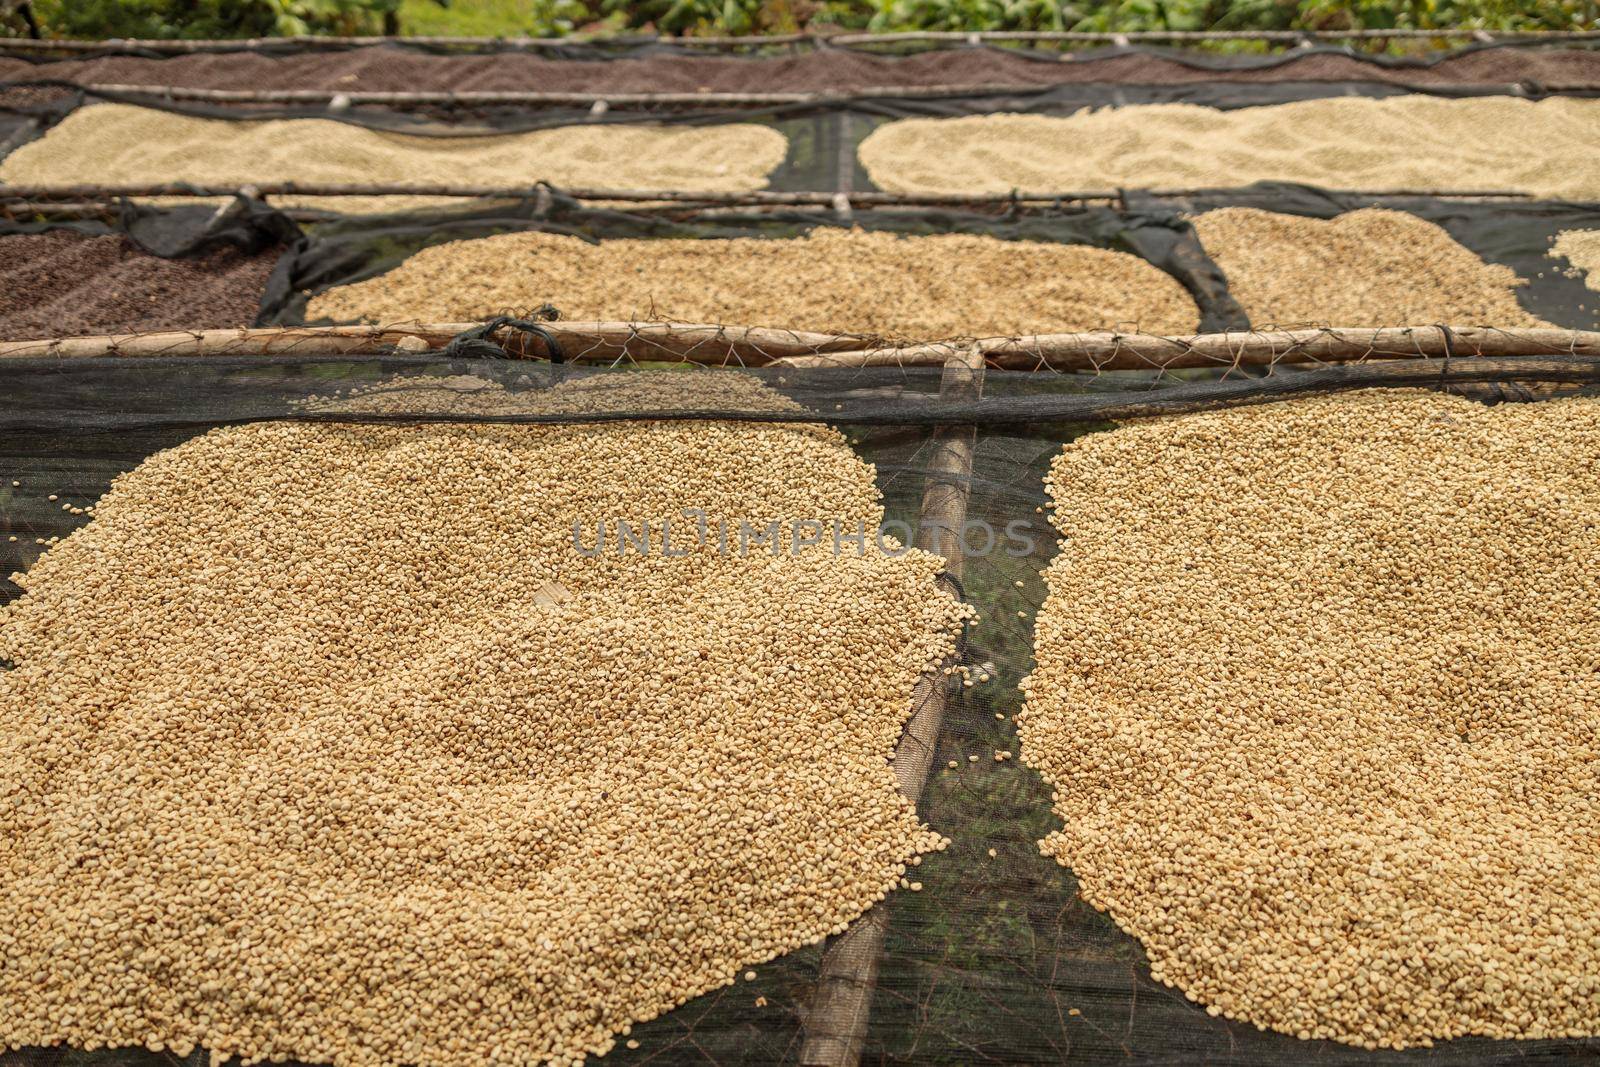 Coffee beans at the stage of drying on the tables outdoors by Yaroslav_astakhov